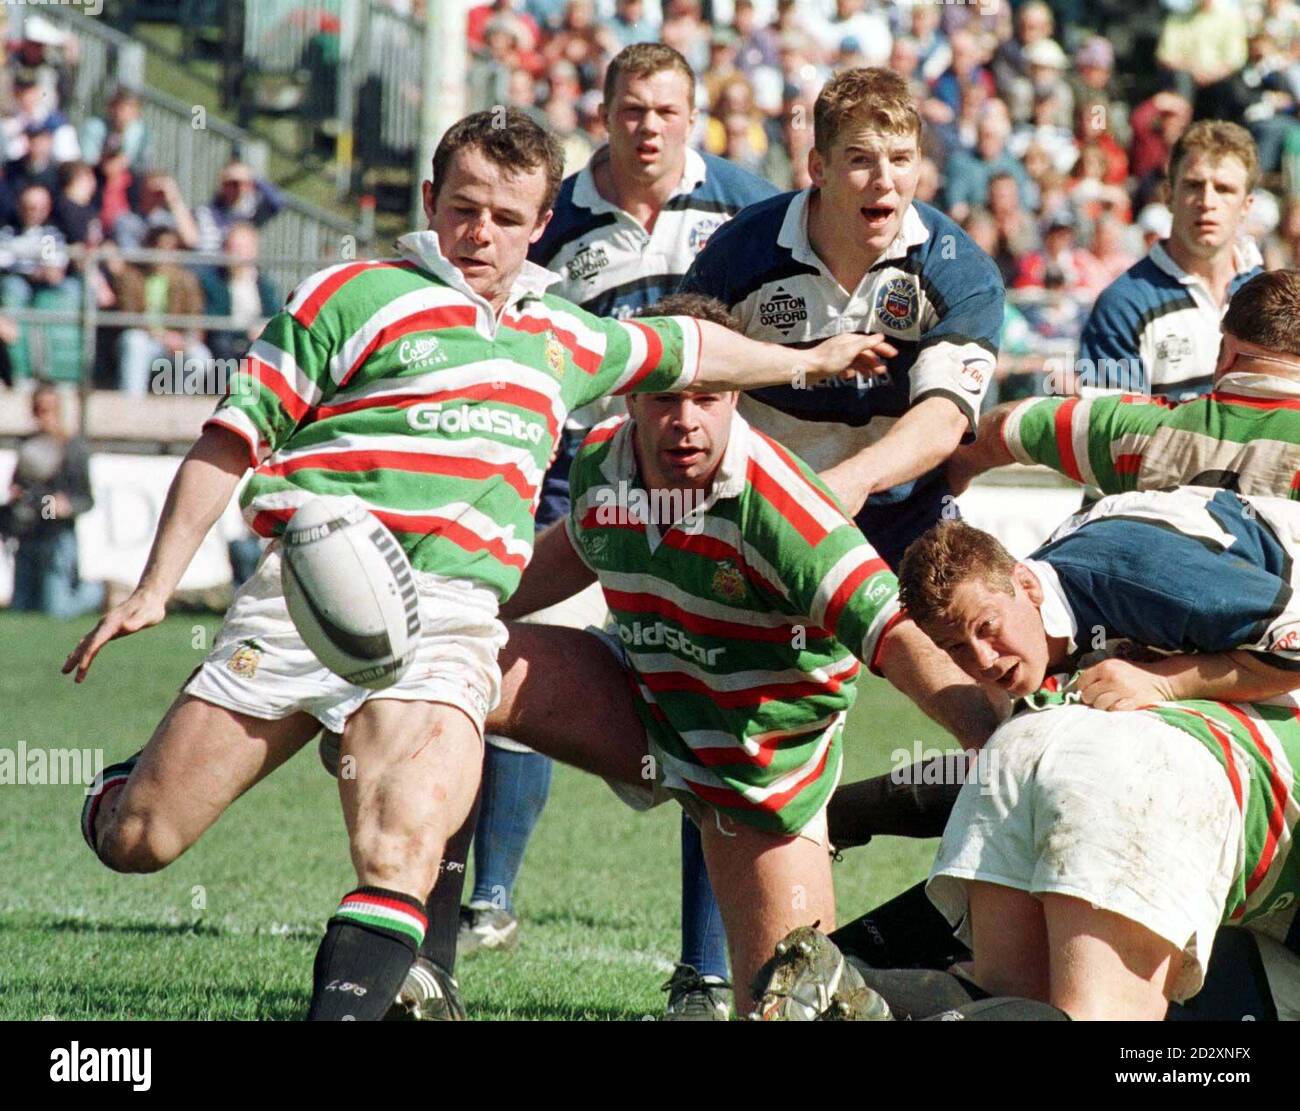 Austin Healey (Leicester) kicks clear from Bath's Dan Lyle (front standing) and Richard Webster (right crouched) during their Courage Clubs Championship match at Bath.   *  Reissued 15/2/99 (cropped) London Irish announced they have cited Leicester and England star Austin Healey for stamping. Their decision means that Healey will face a Rugby Football Union disciplinary hearing, and if found guilty, could receive a recommended 12-week ban. Stock Photo